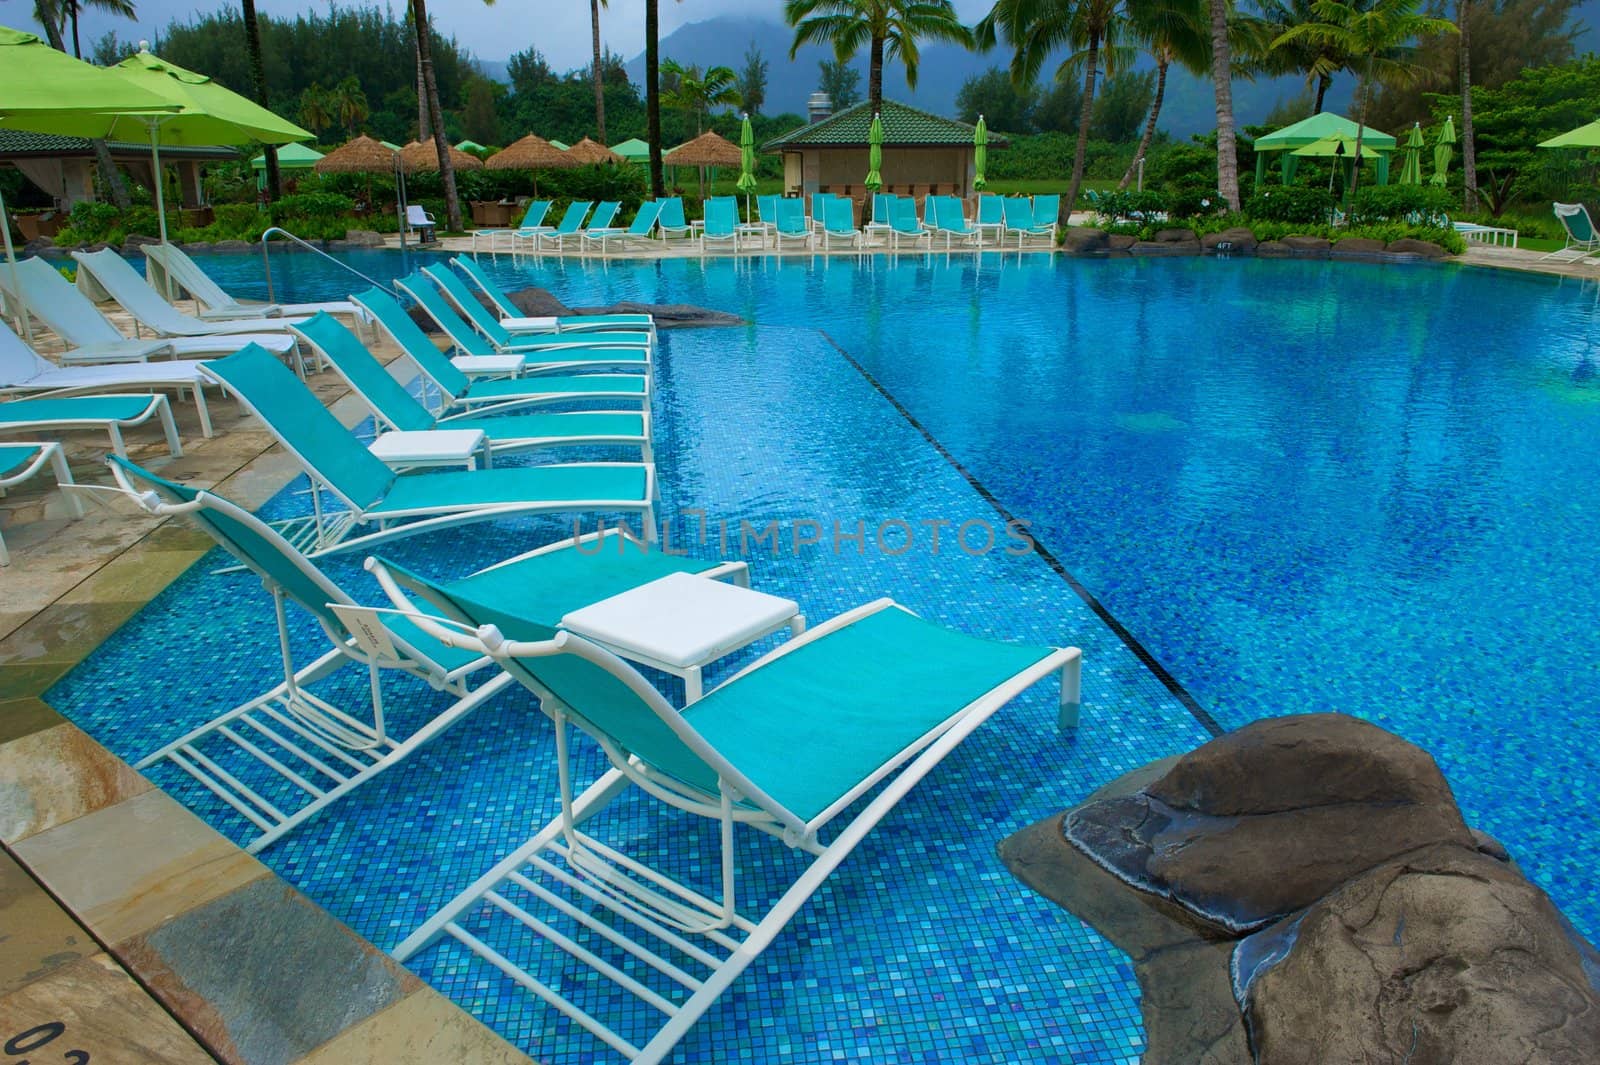 Turquoise chairs sitting in a deep blue swimming pool surrounded by green umbrellas at an upscale resort in Kauai, Hawaii